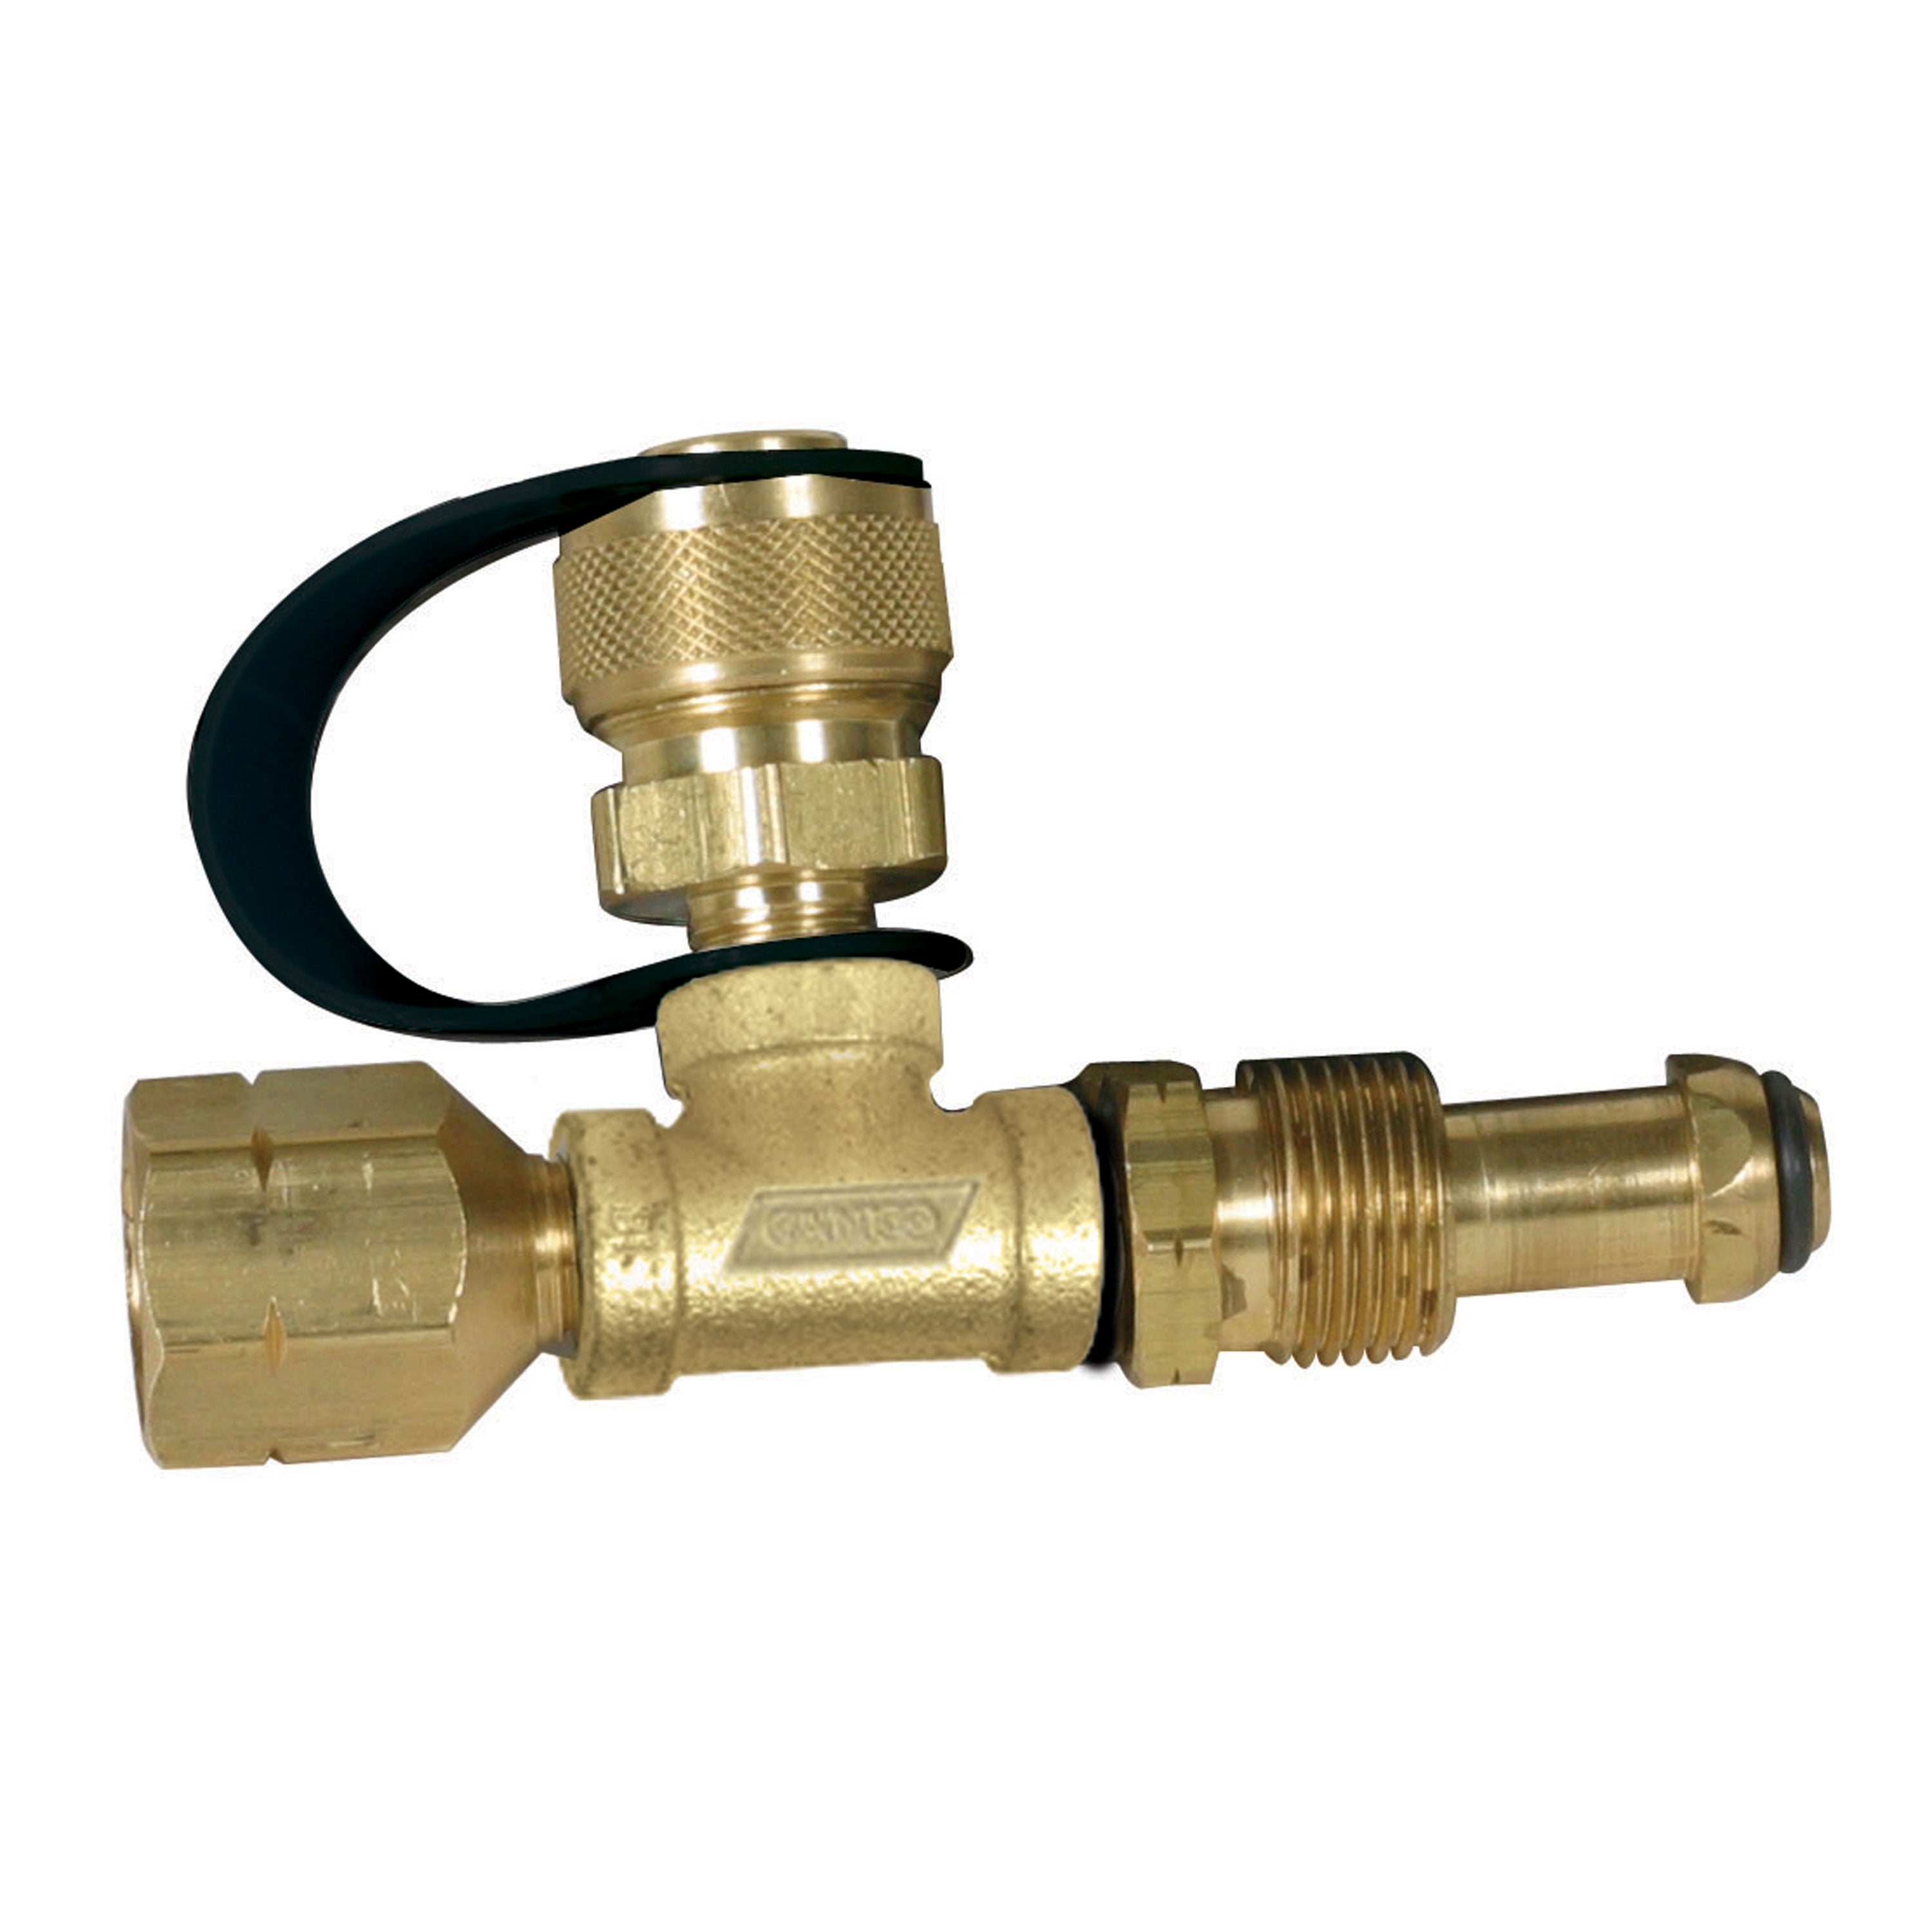 Camco 59093 Brass Tee With 3 Ports